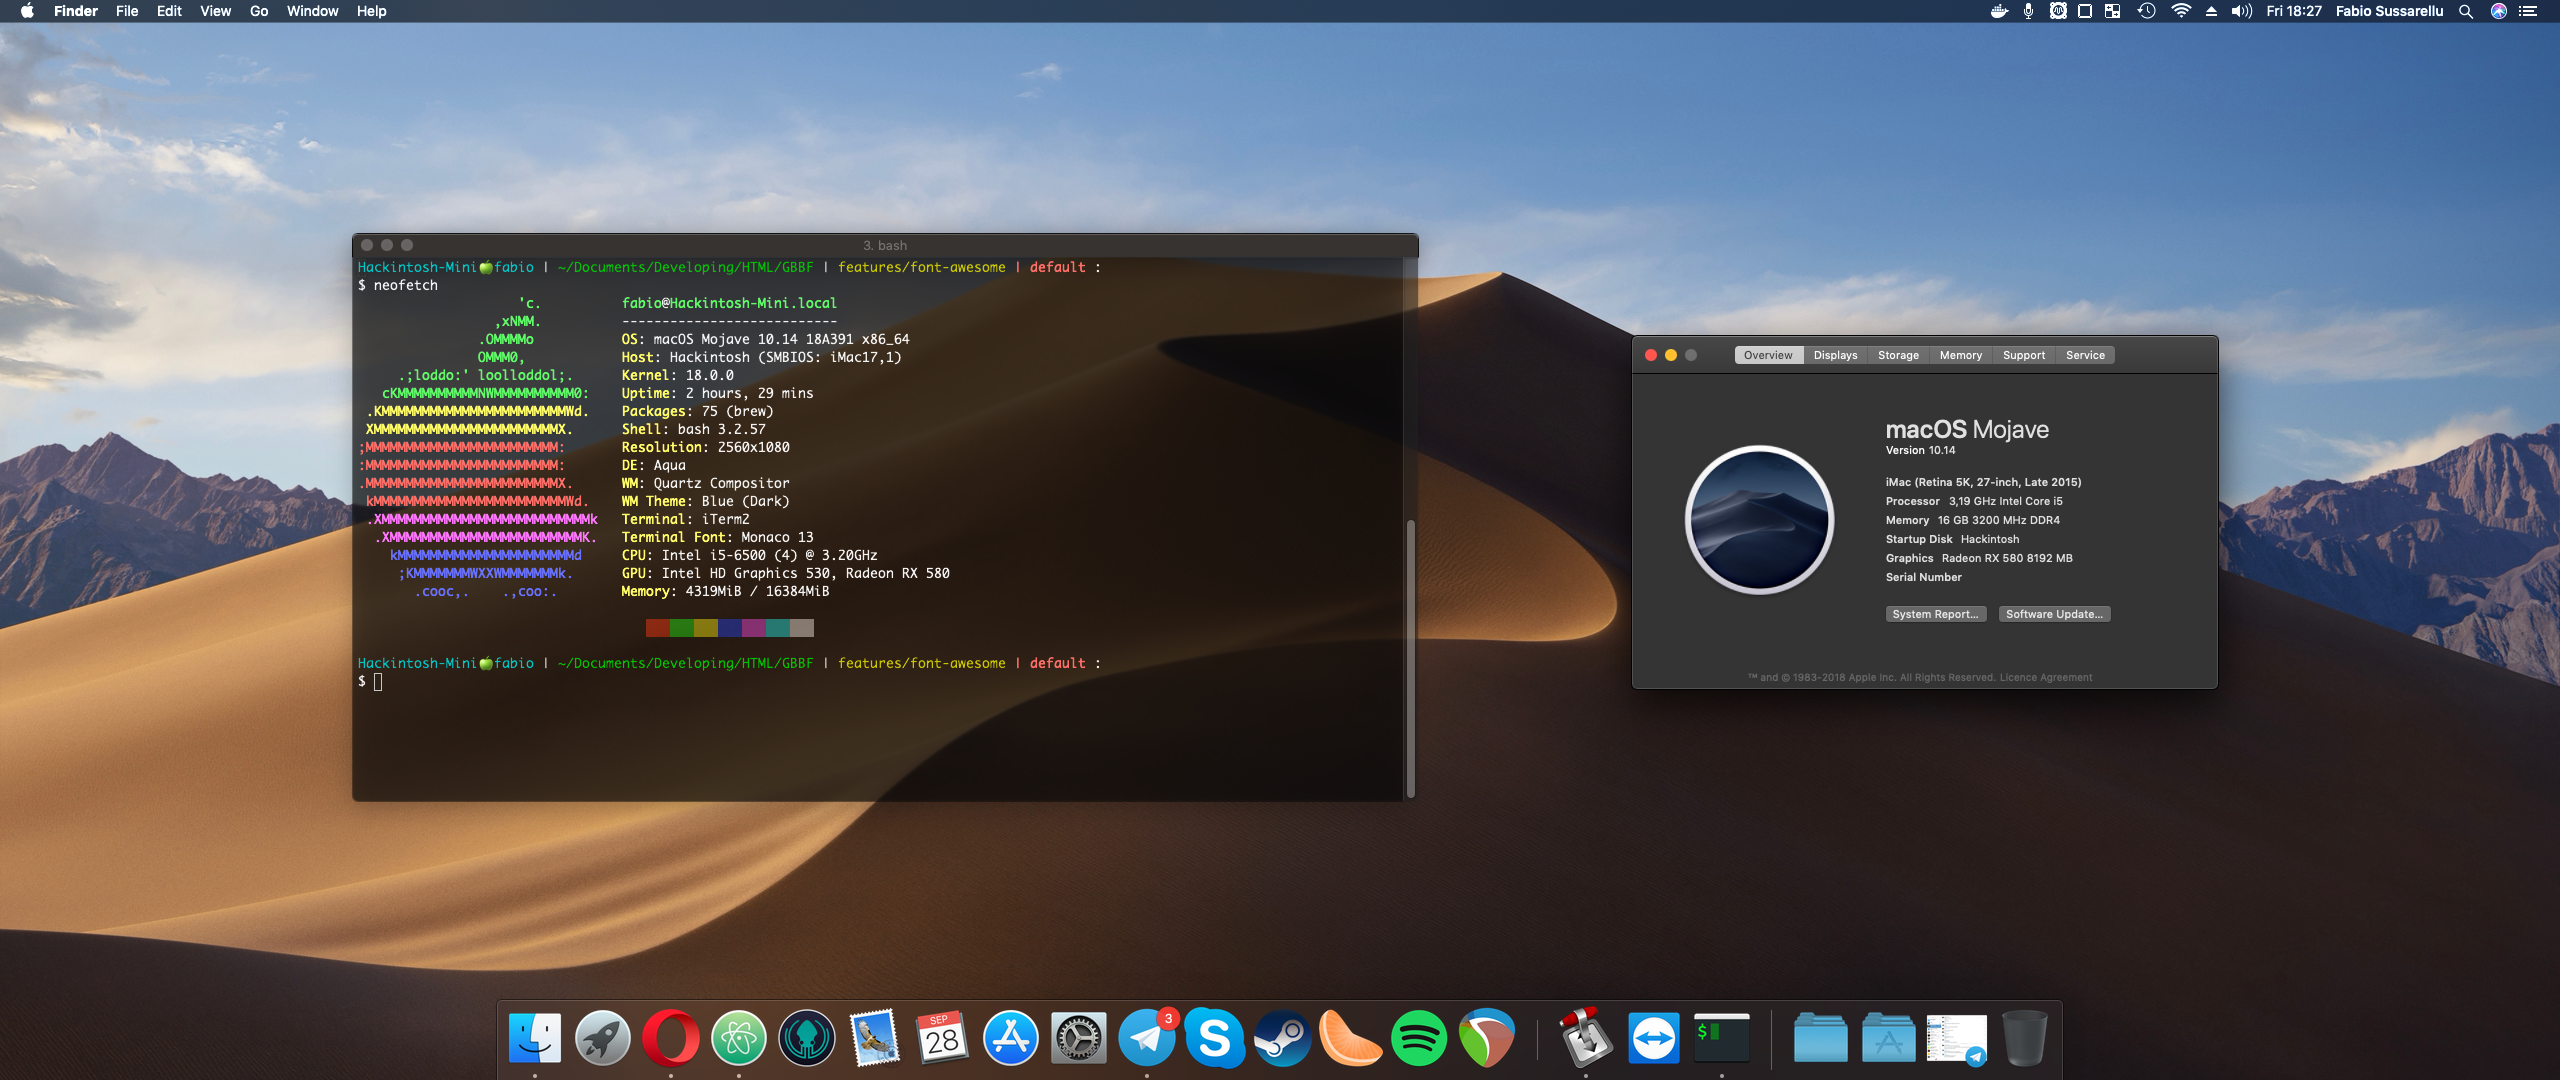 Latest nvidia web drivers for macos mojave hackintosh update